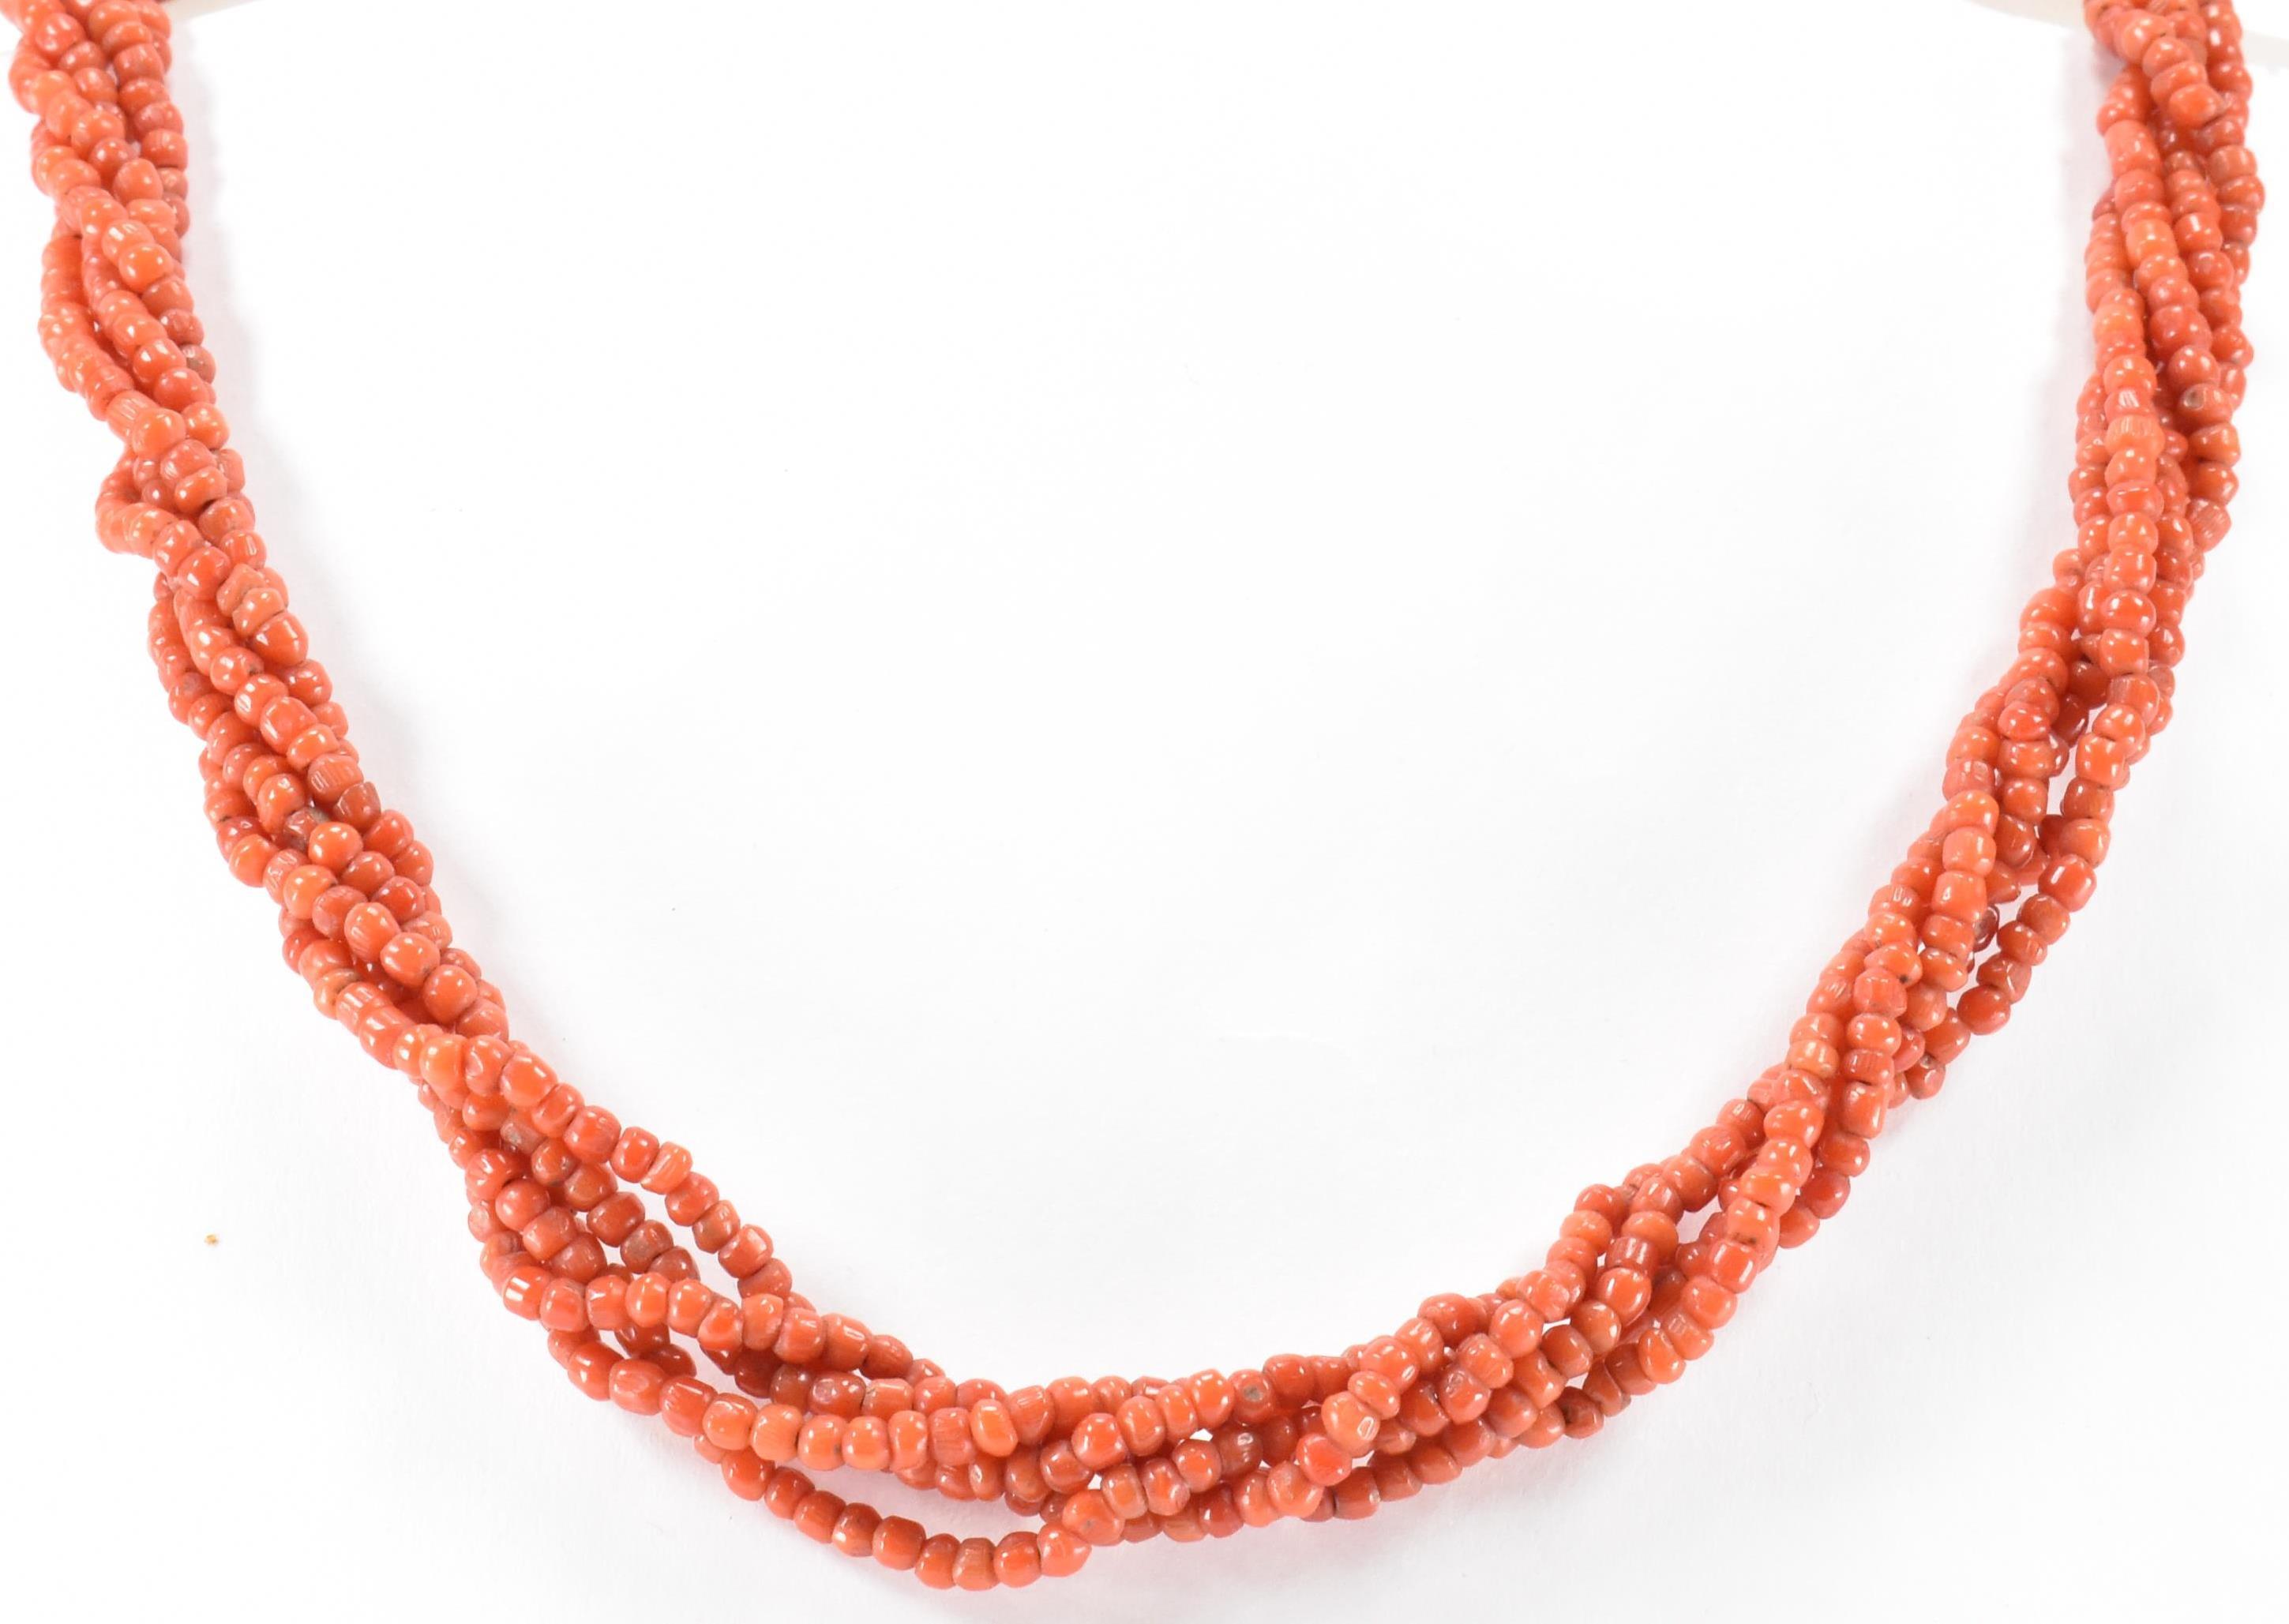 VICTORIAN GOLD & CORAL NECKLACE - Image 3 of 5